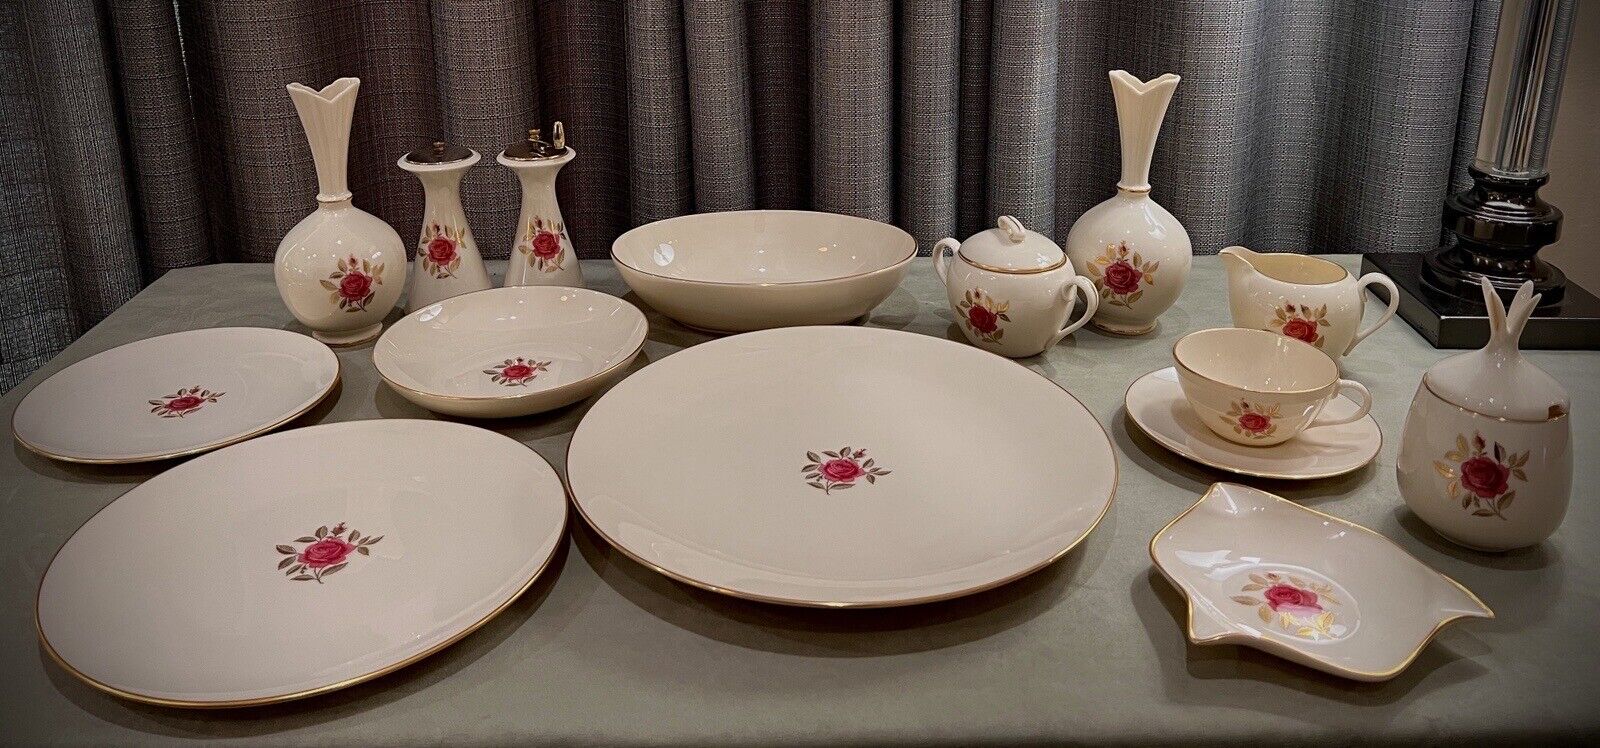 Gorgeous Sets Lenox Roselyn Fine China Pink Rose Gold Trim Full set for 6 People